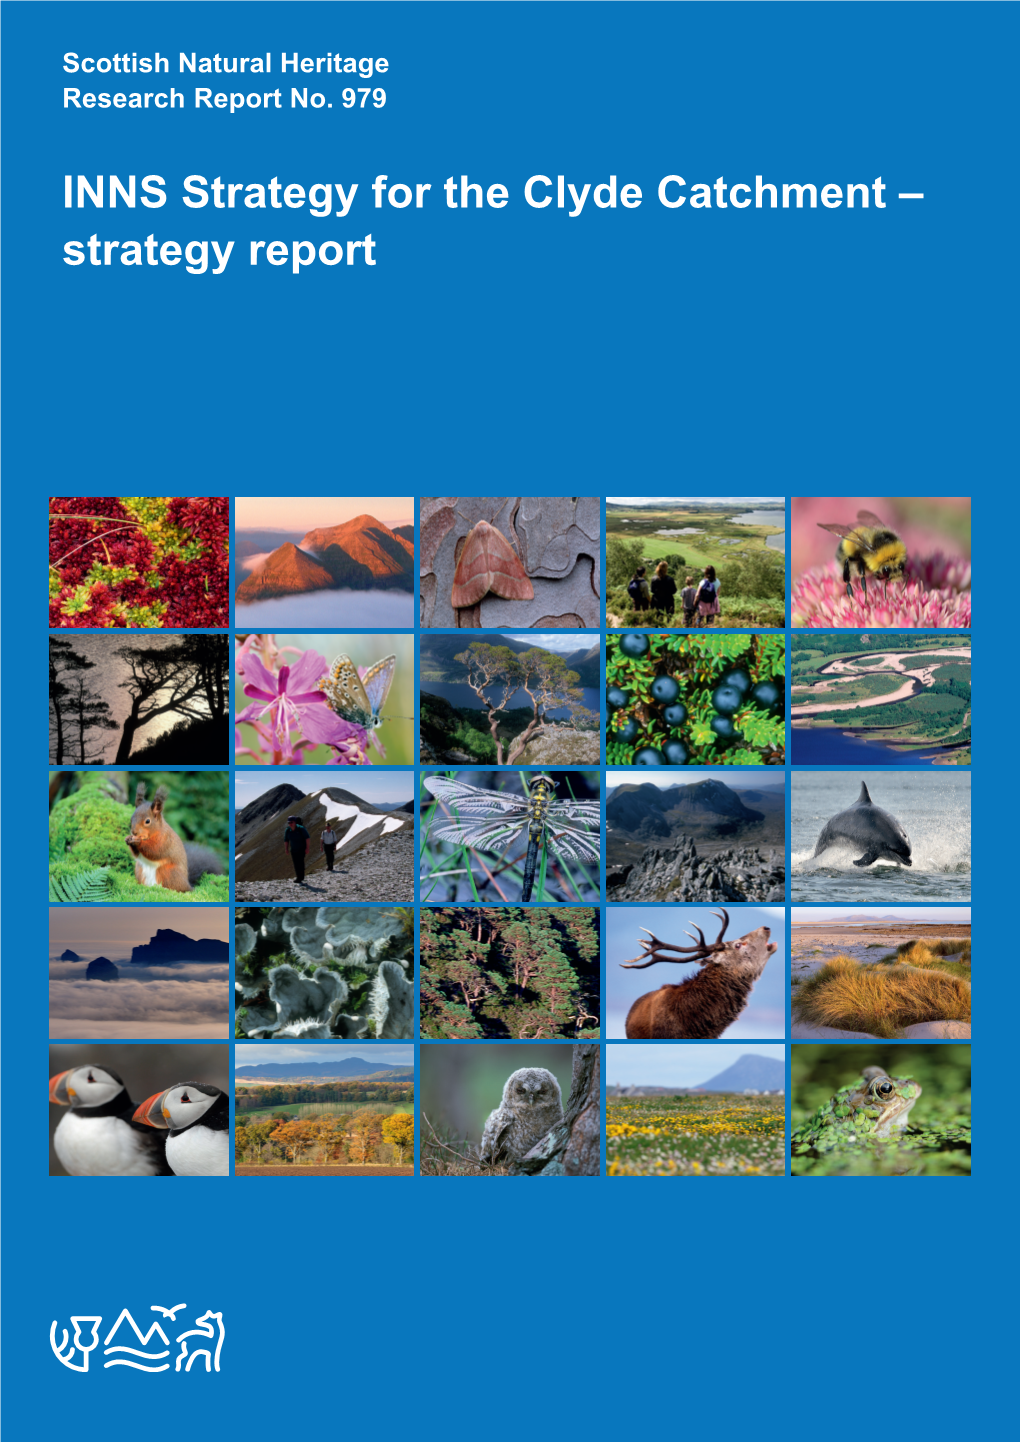 SNH Research Report 979: INNS Strategy for the Clyde Catchment